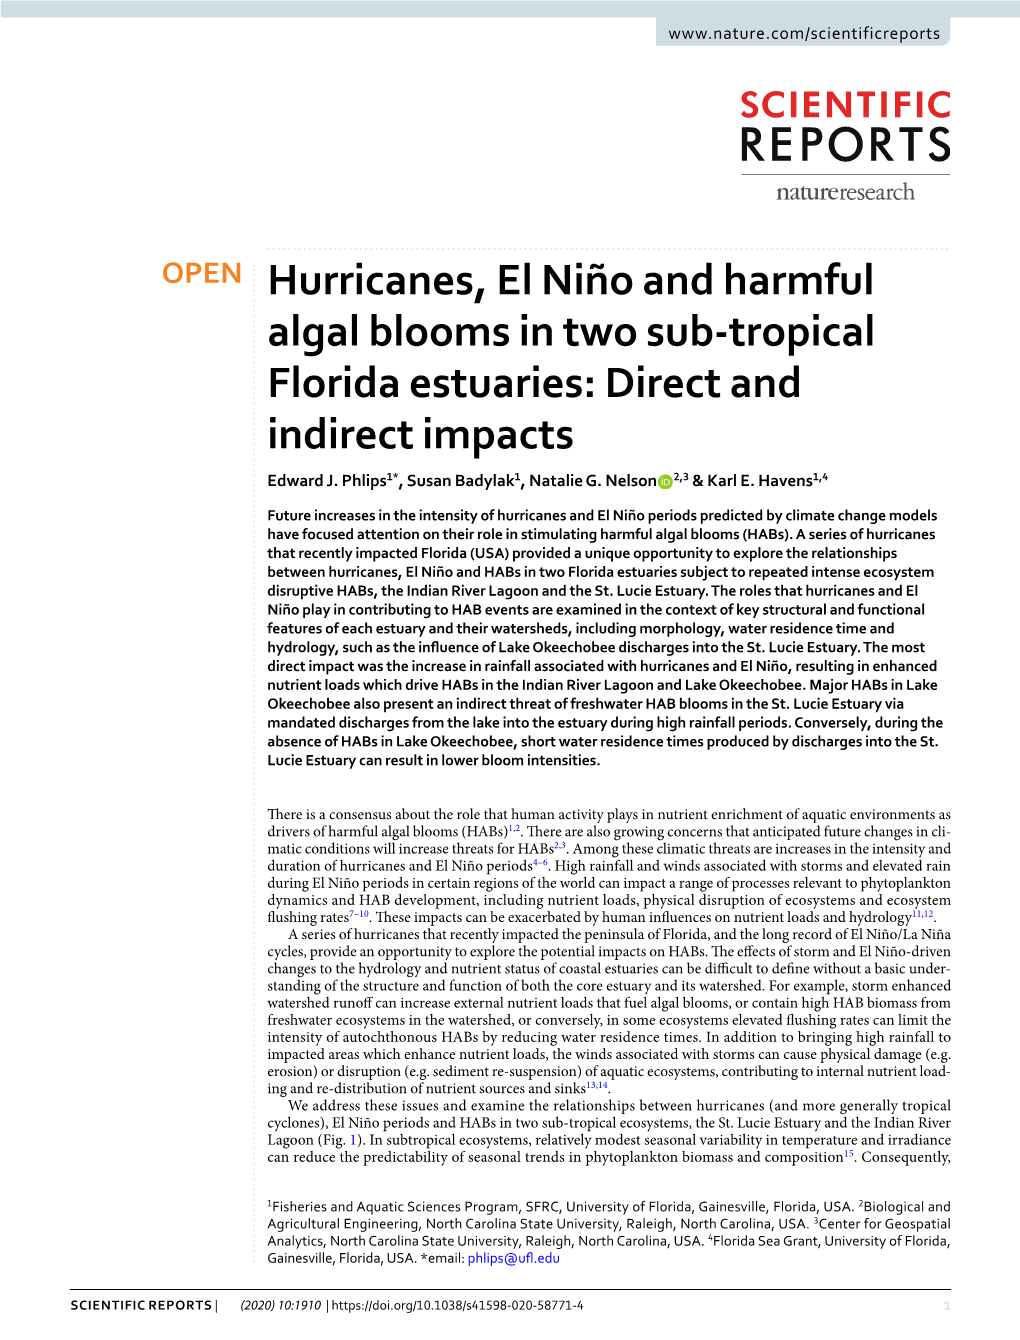 Hurricanes, El Niño and Harmful Algal Blooms in Two Sub-Tropical Florida Estuaries: Direct and Indirect Impacts Edward J